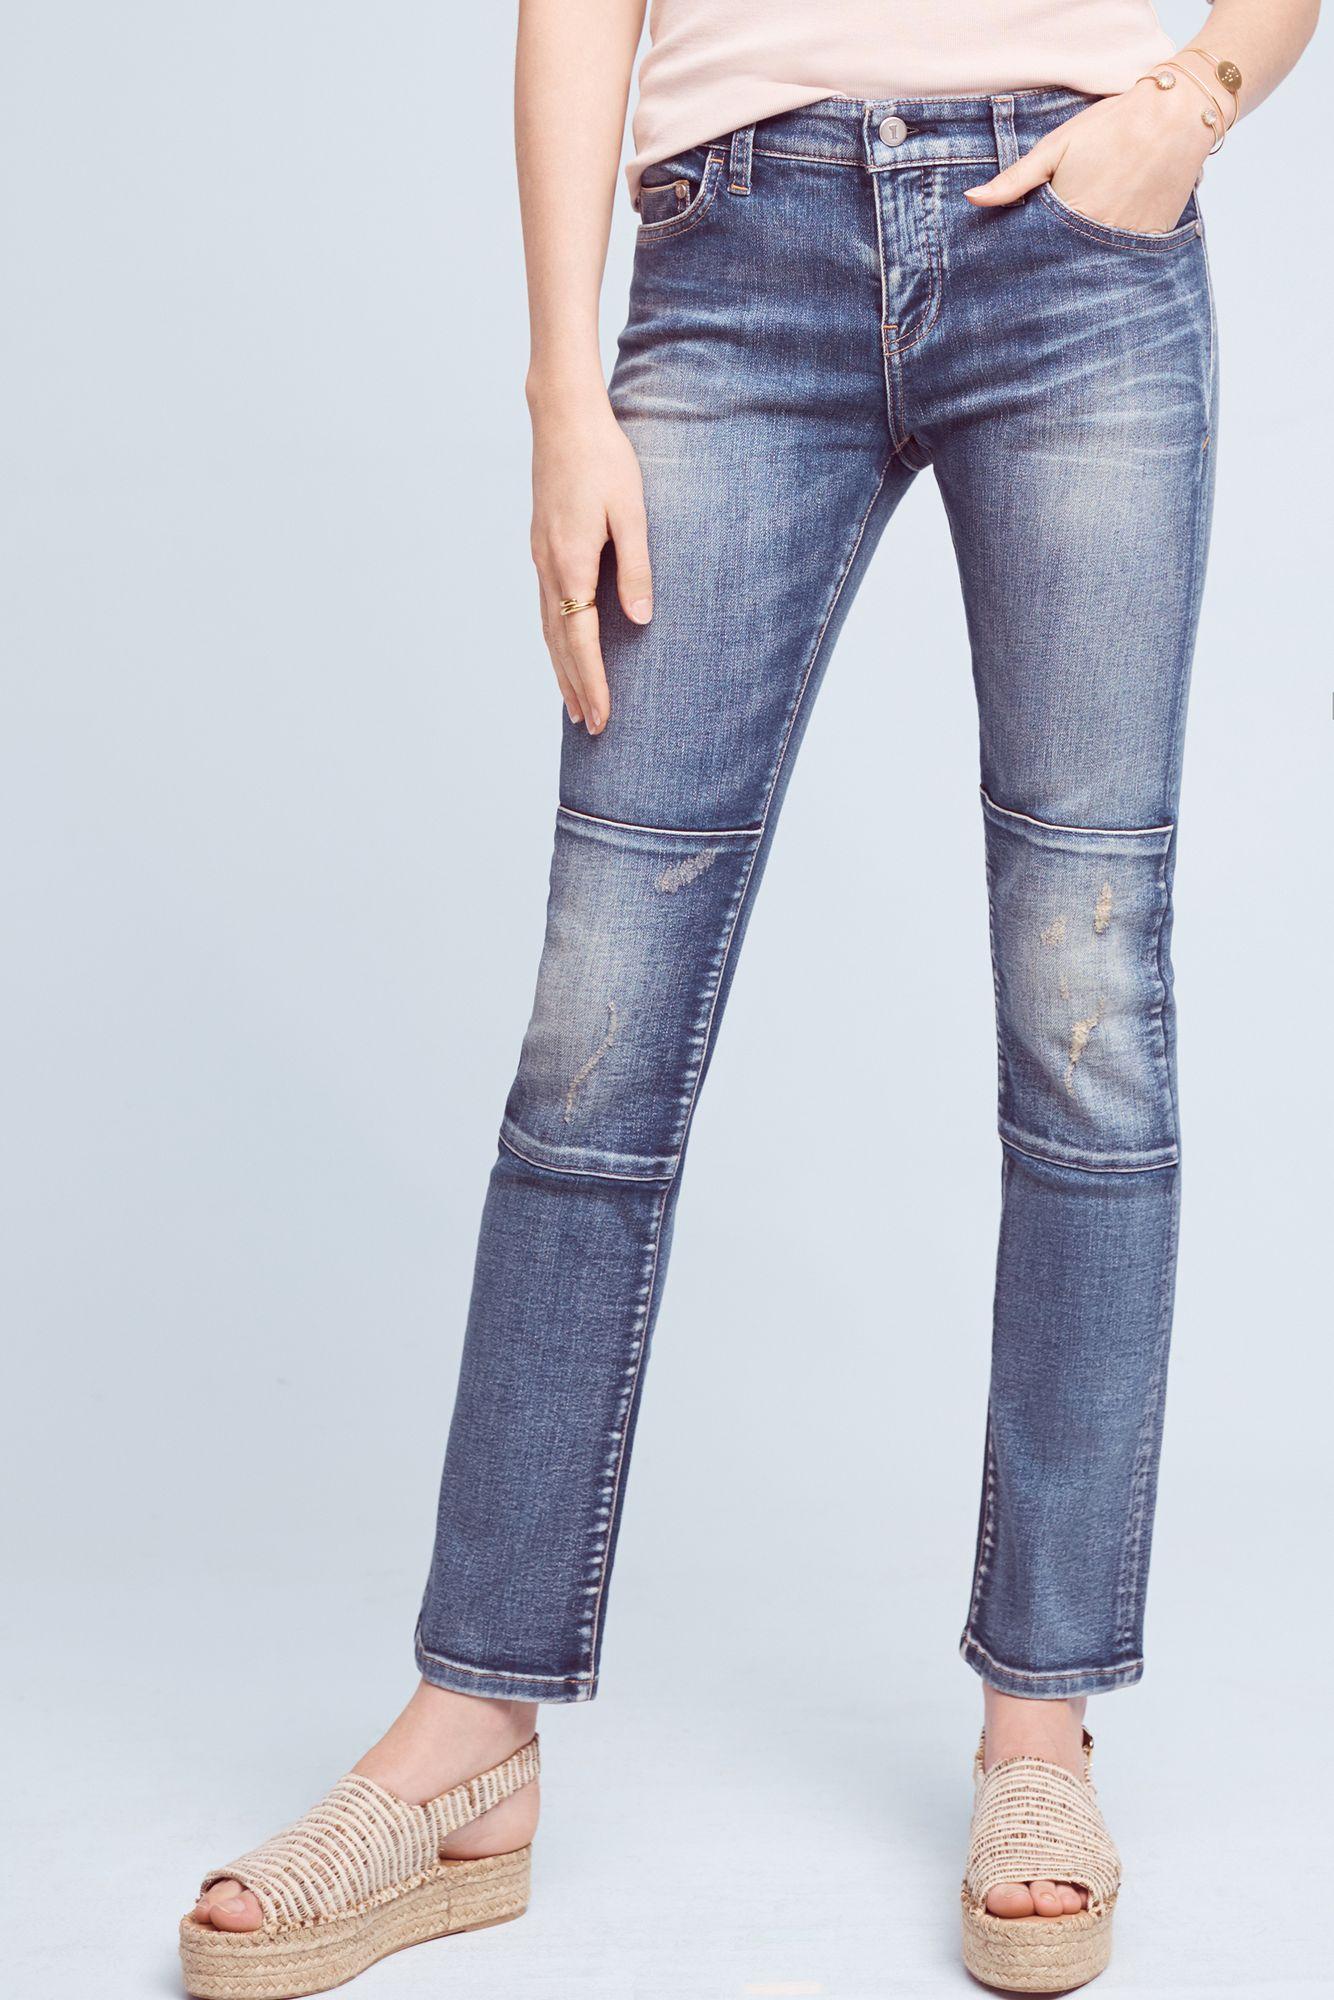 Lyst - Pilcro Parallel Mid-rise Straight Jeans in Blue